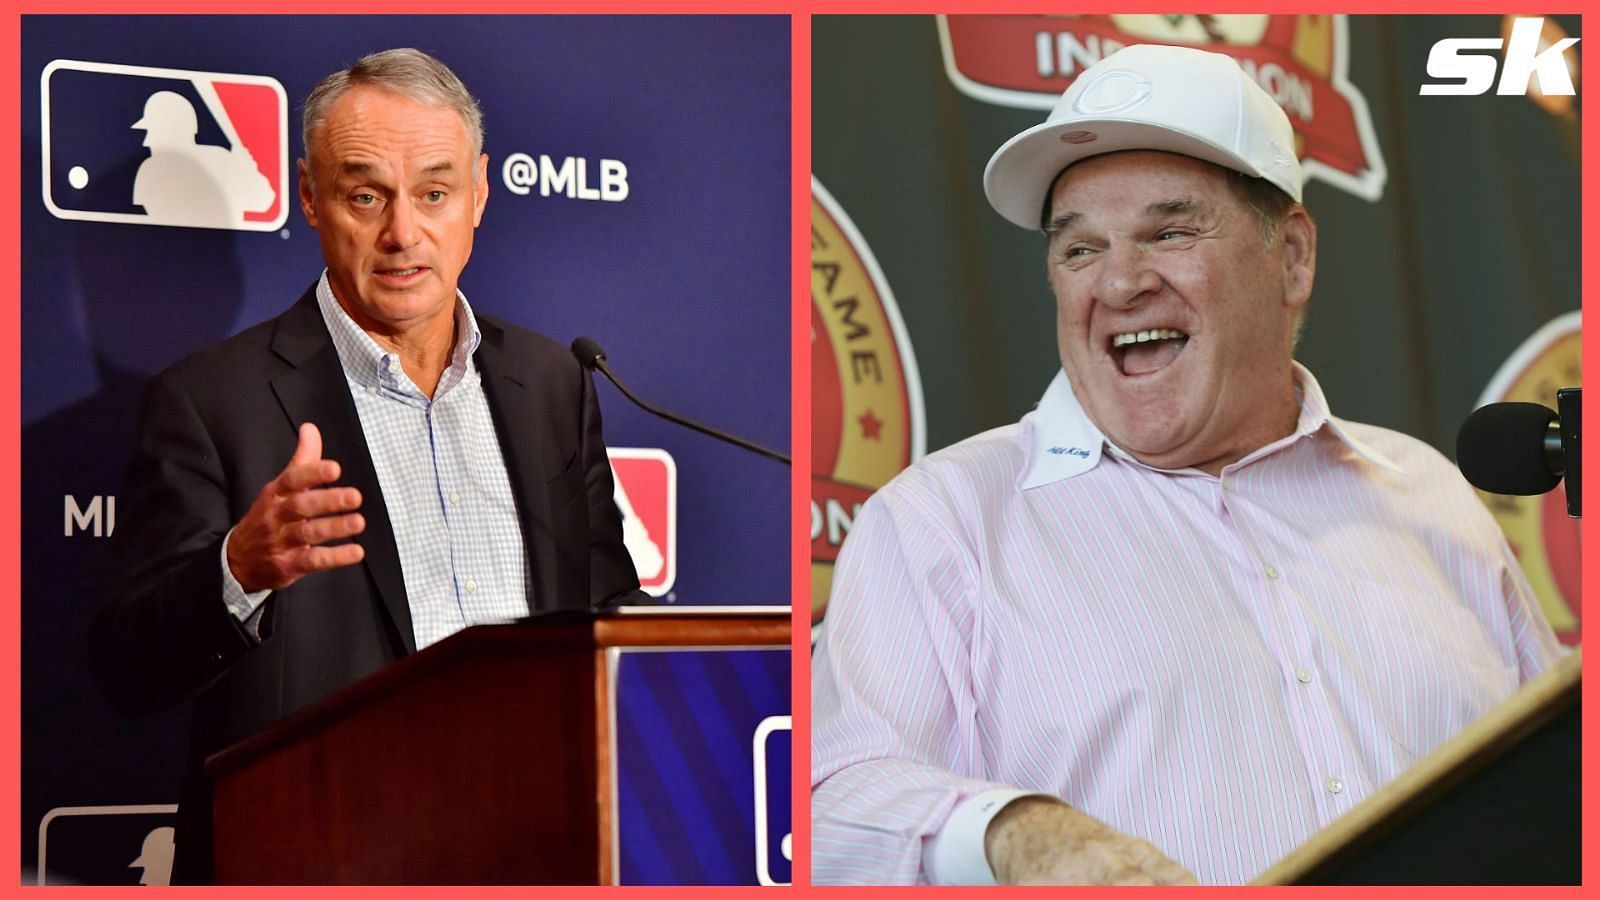 MLB commissioner Rob Manfred quashes possibility of Pete Rose's  reinstatement in spite of league's current cozy relationship with gambling